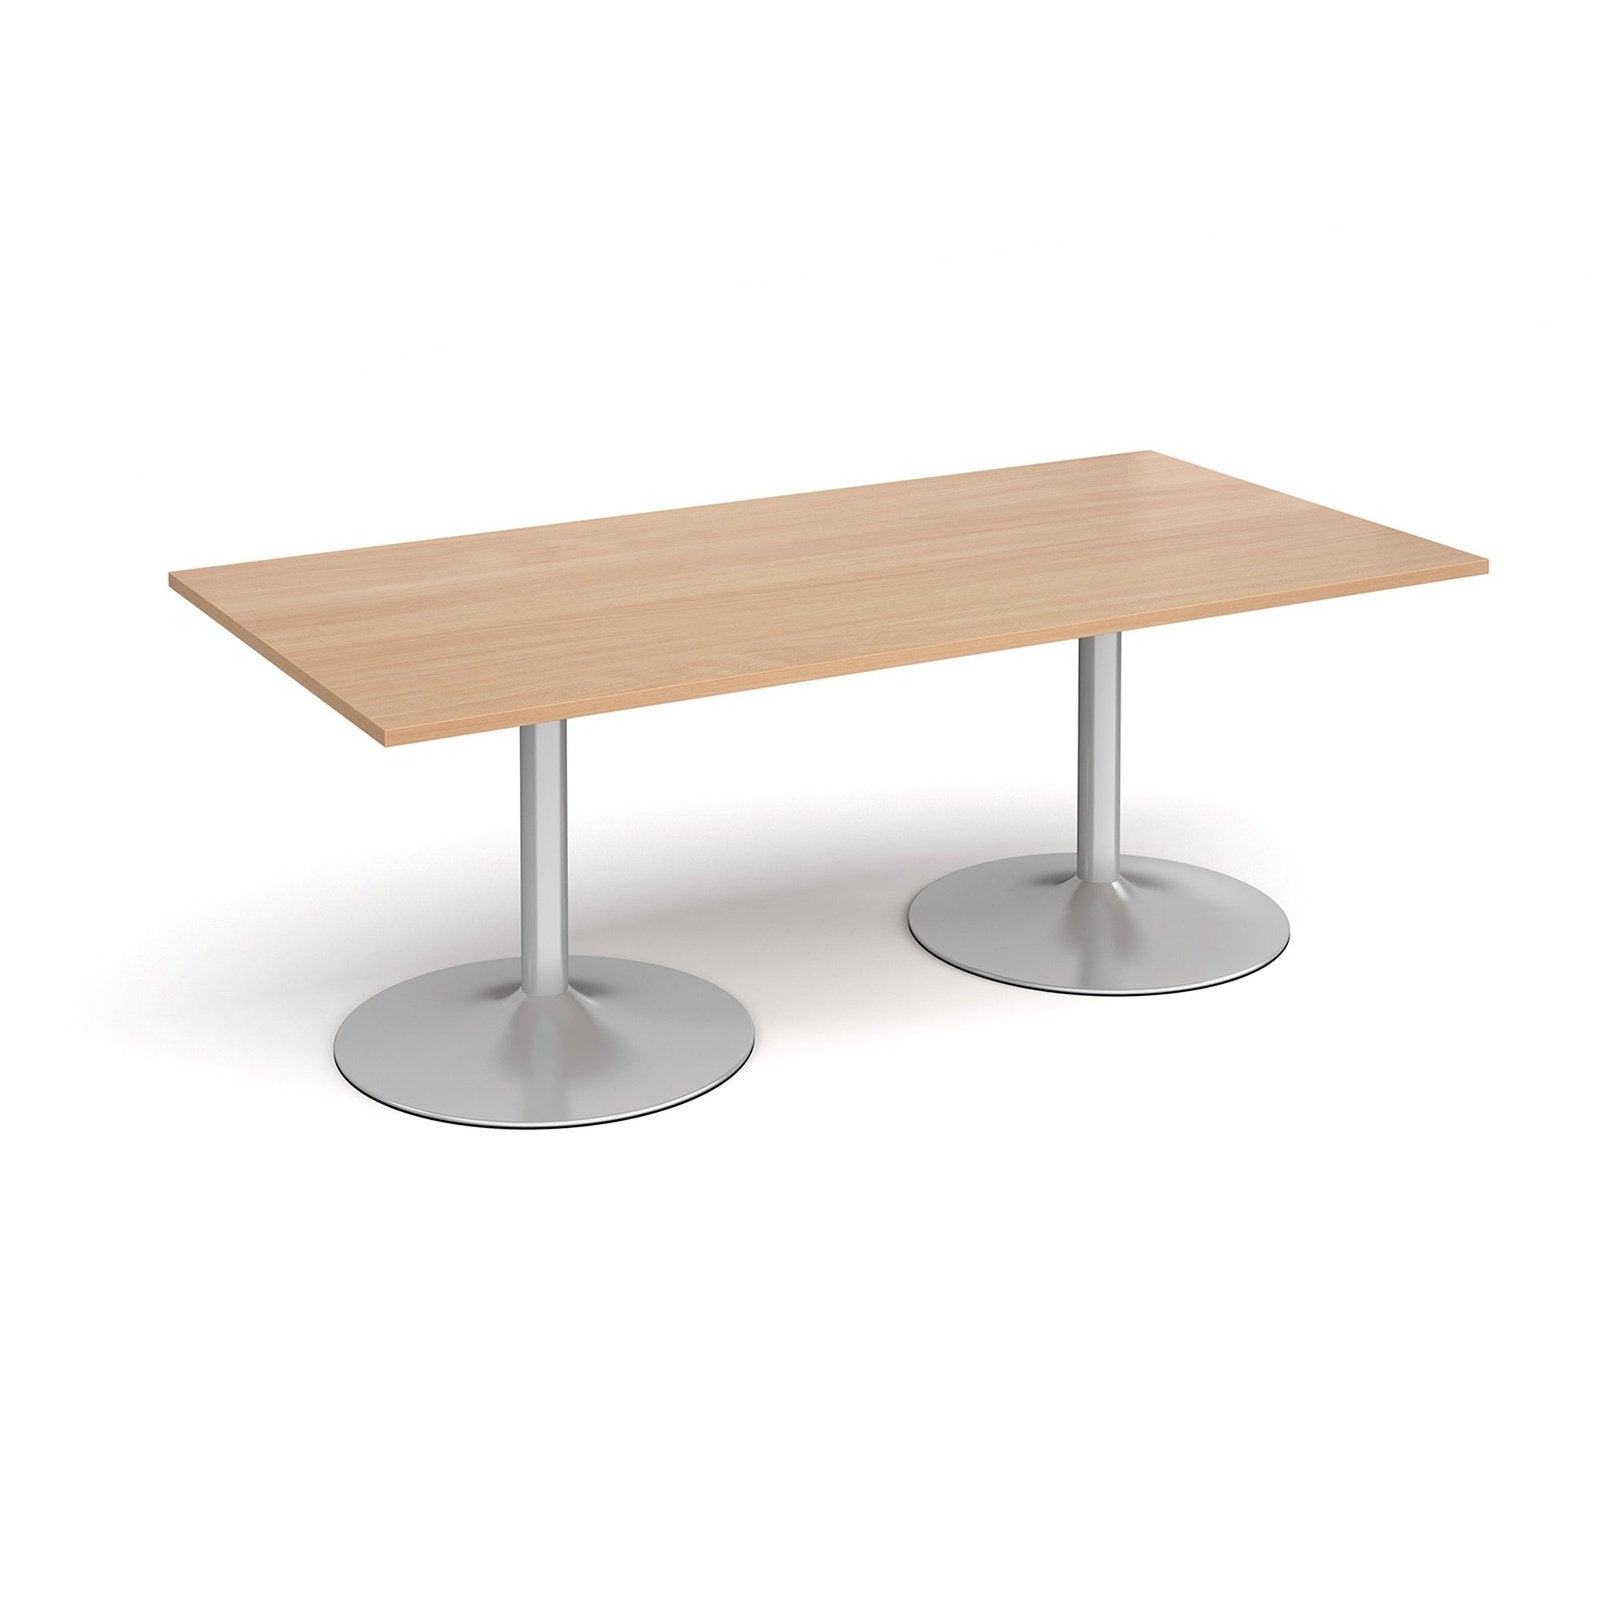 Trumpet base rectangular boardroom table - Office Products Online